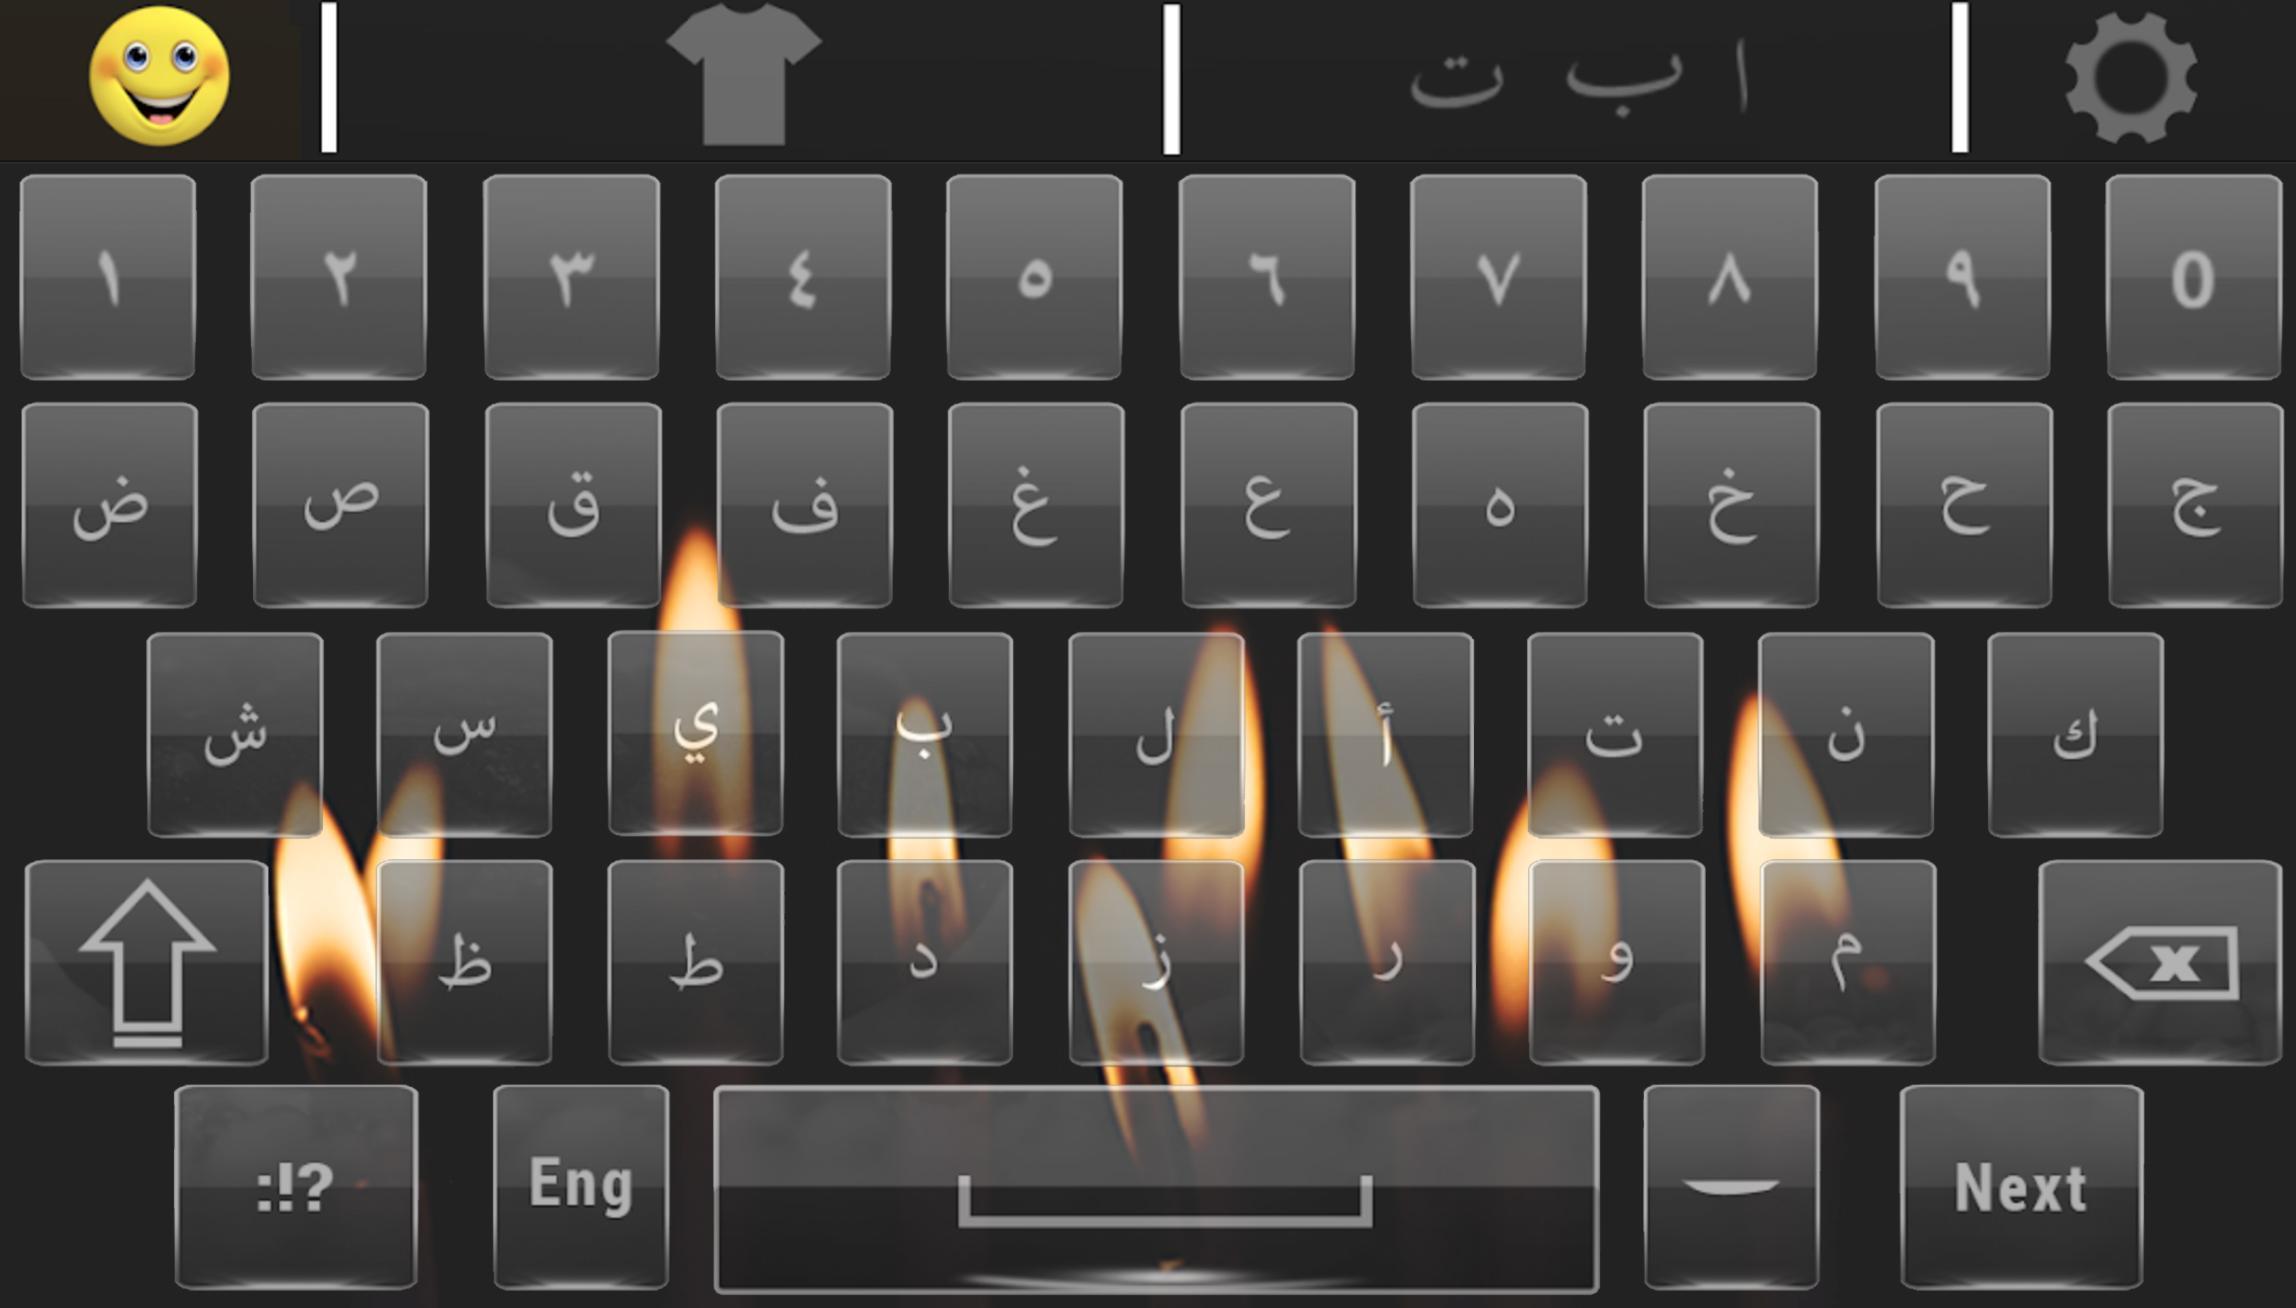 Luxury Arabic keyboard 2019 – Fast Typing Keyboard for Android - APK  Download